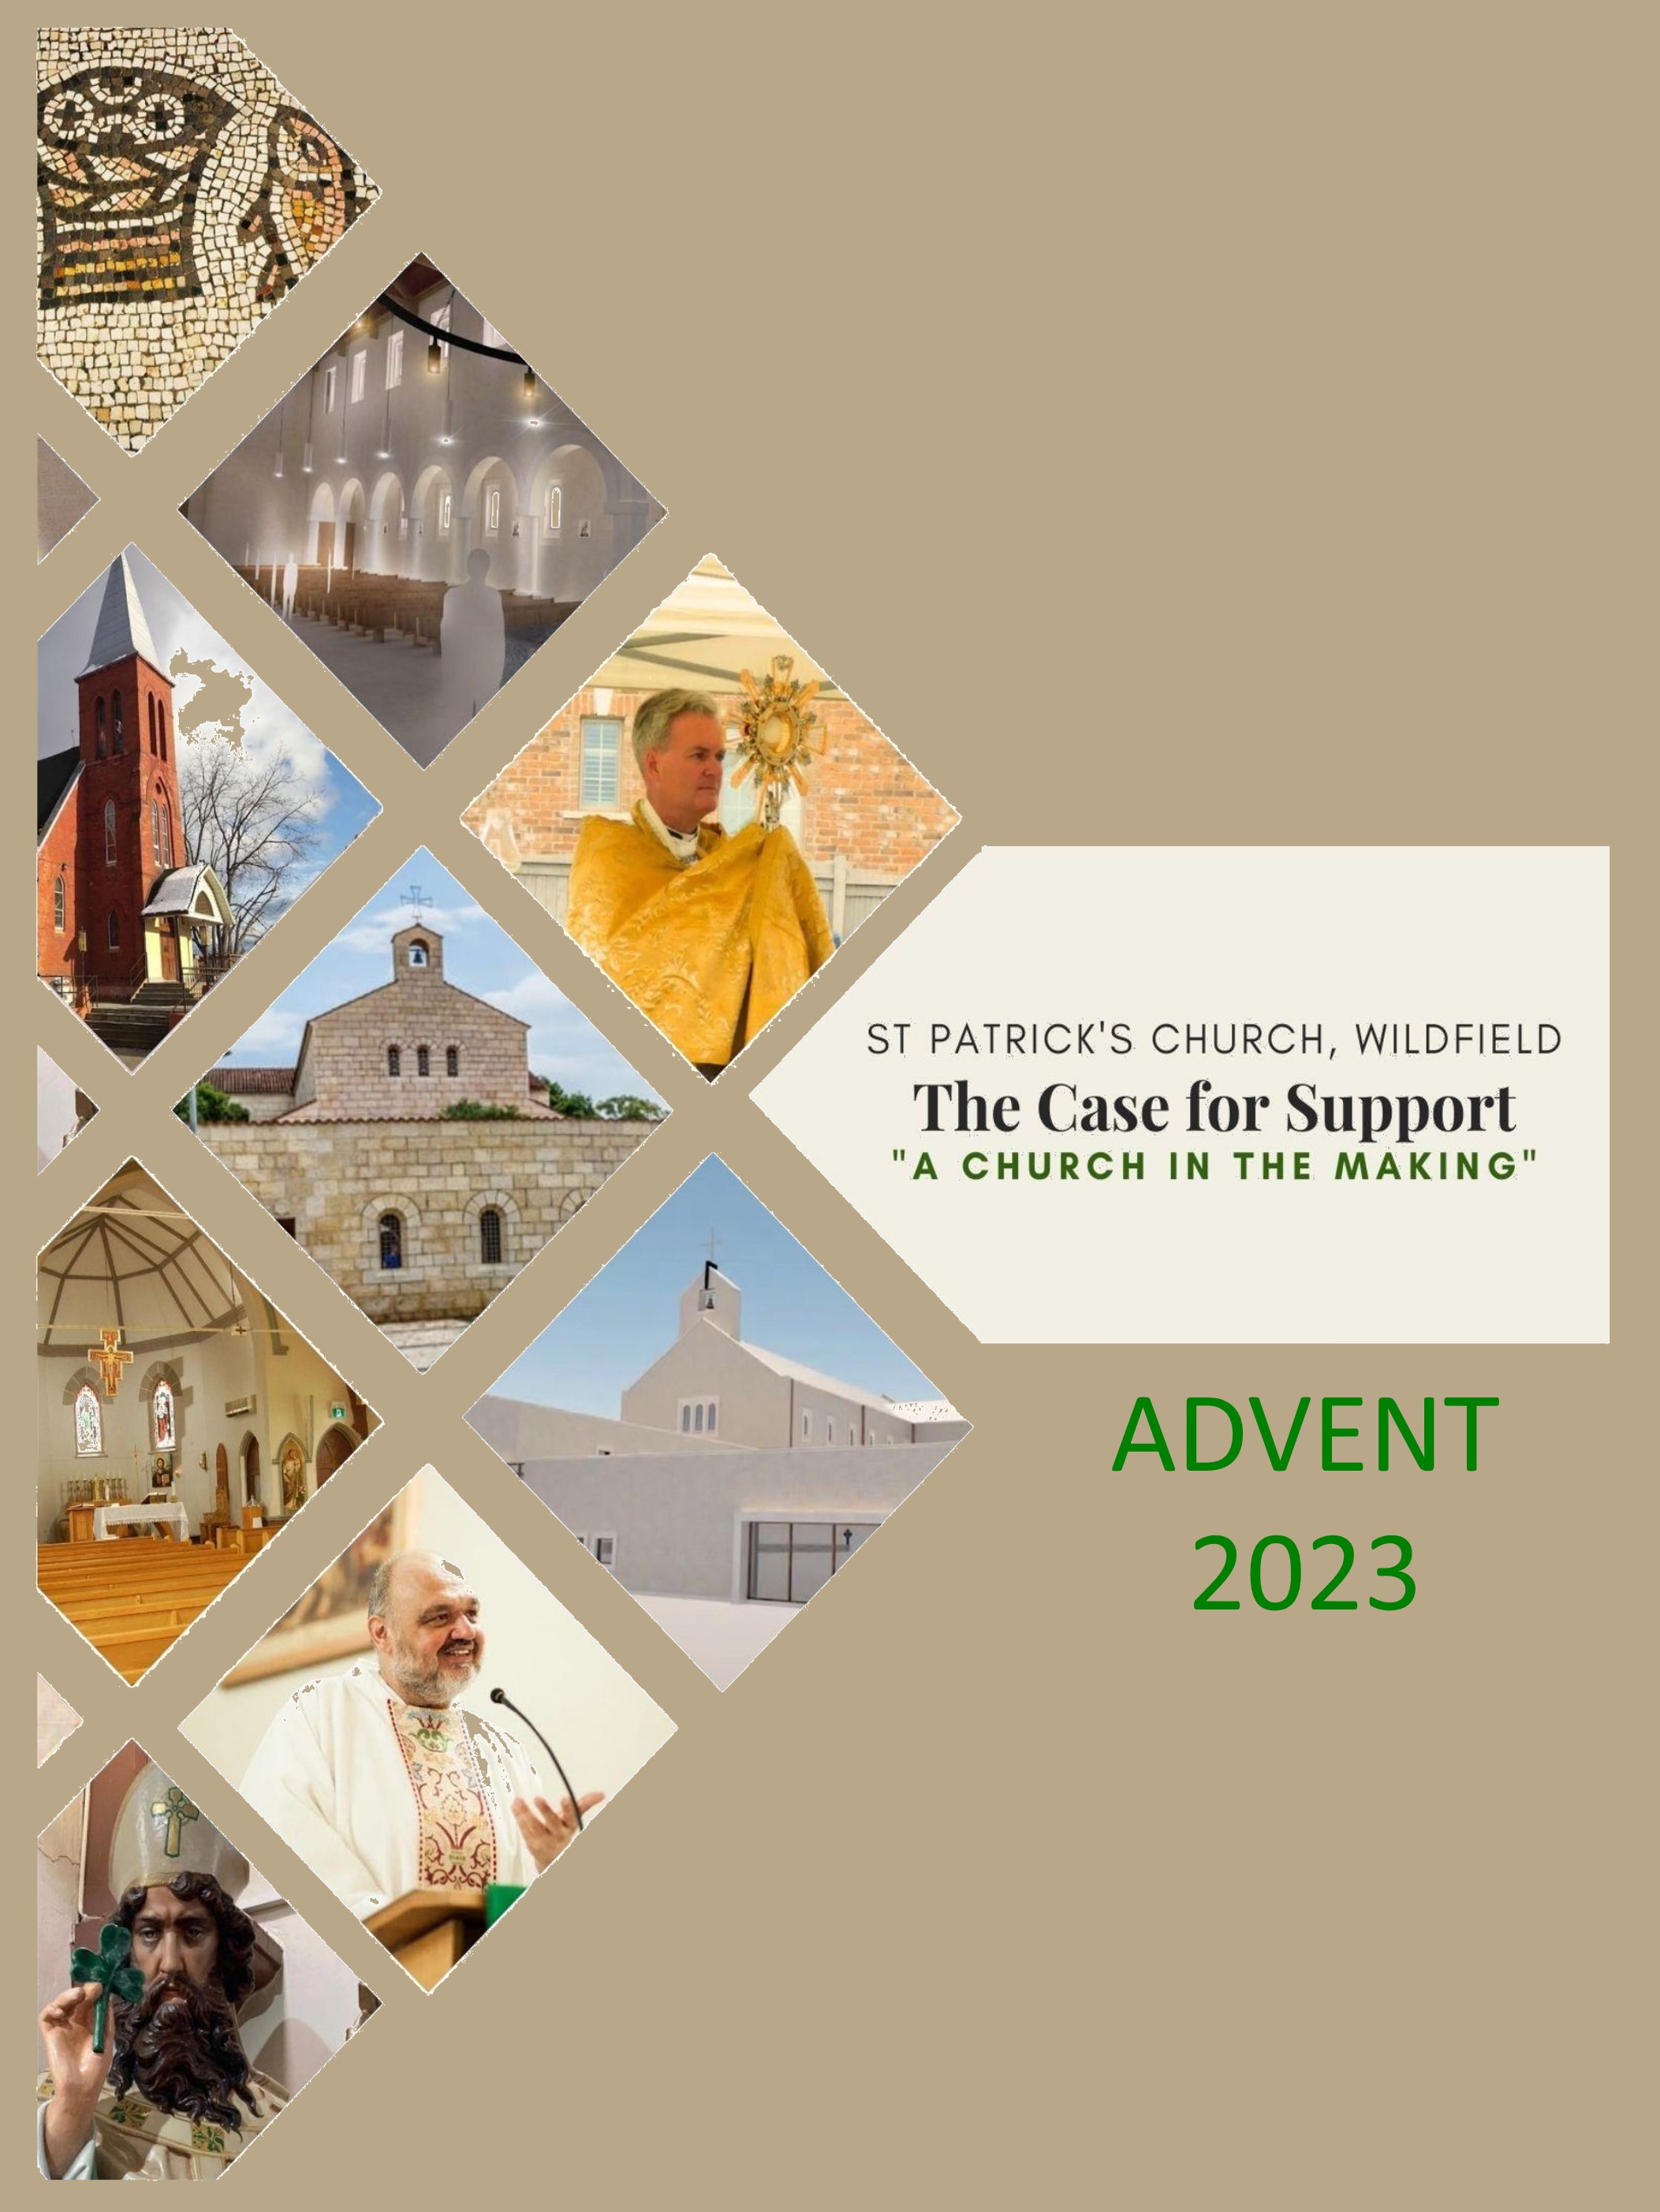 New Church Building Update - Advent 2023